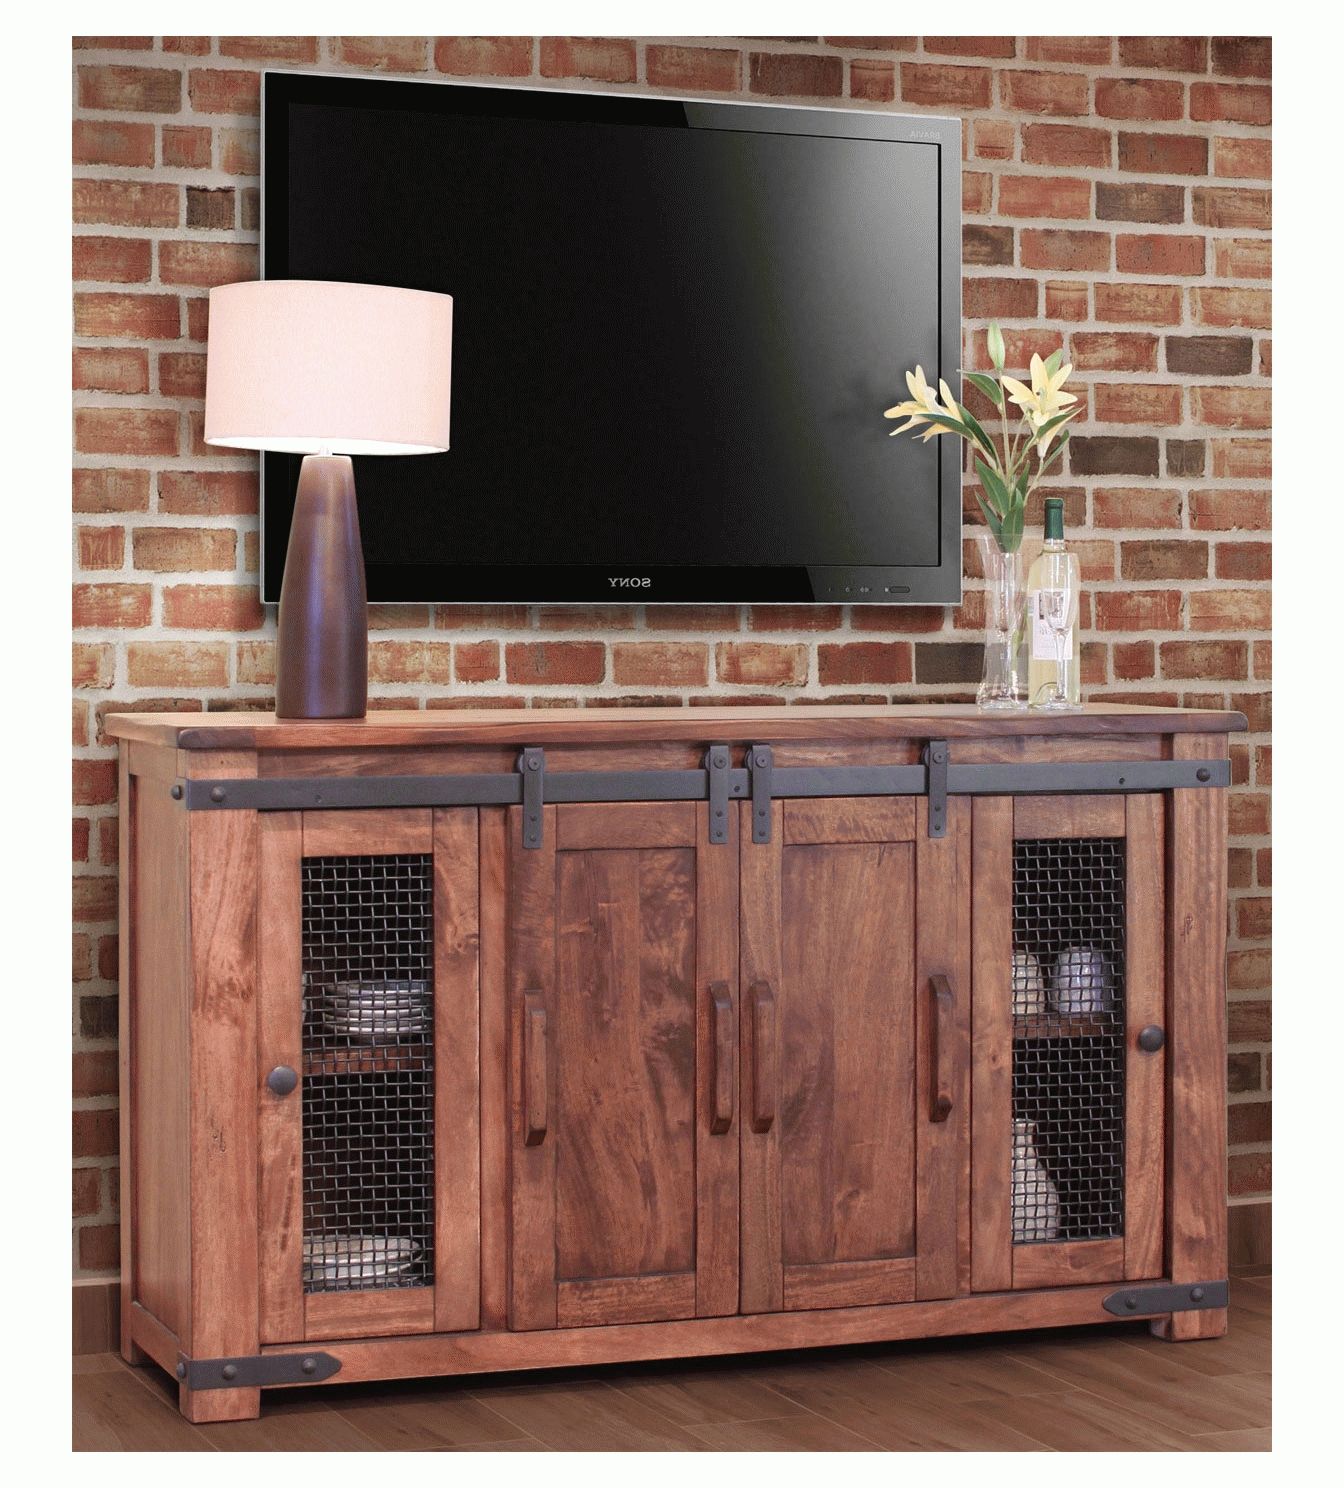 Rustic Barn Door Tv Stand, Barn Door Tv Stand, Barn Door Tv Console Regarding Rustic Tv Stands (View 3 of 20)